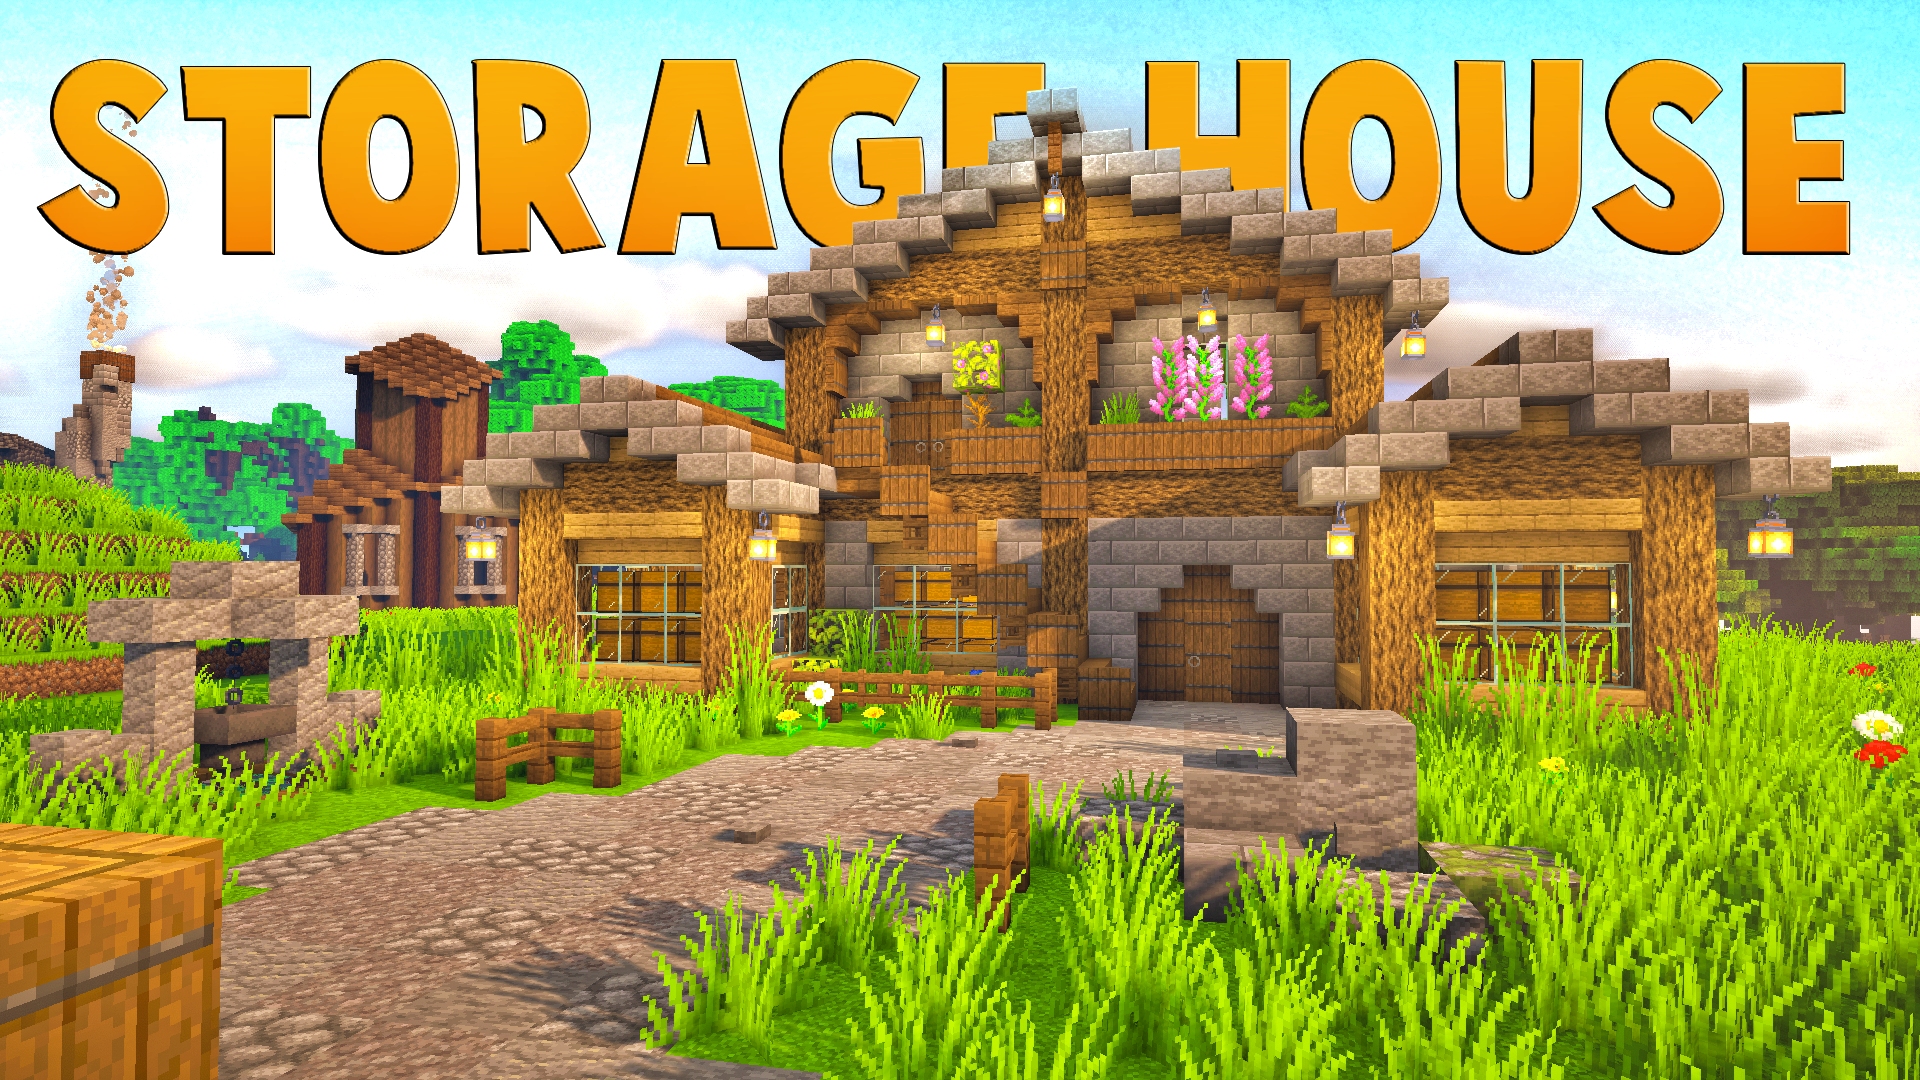 Minecract The Ultimate Storage House Medieval Build! schematic (litematic)